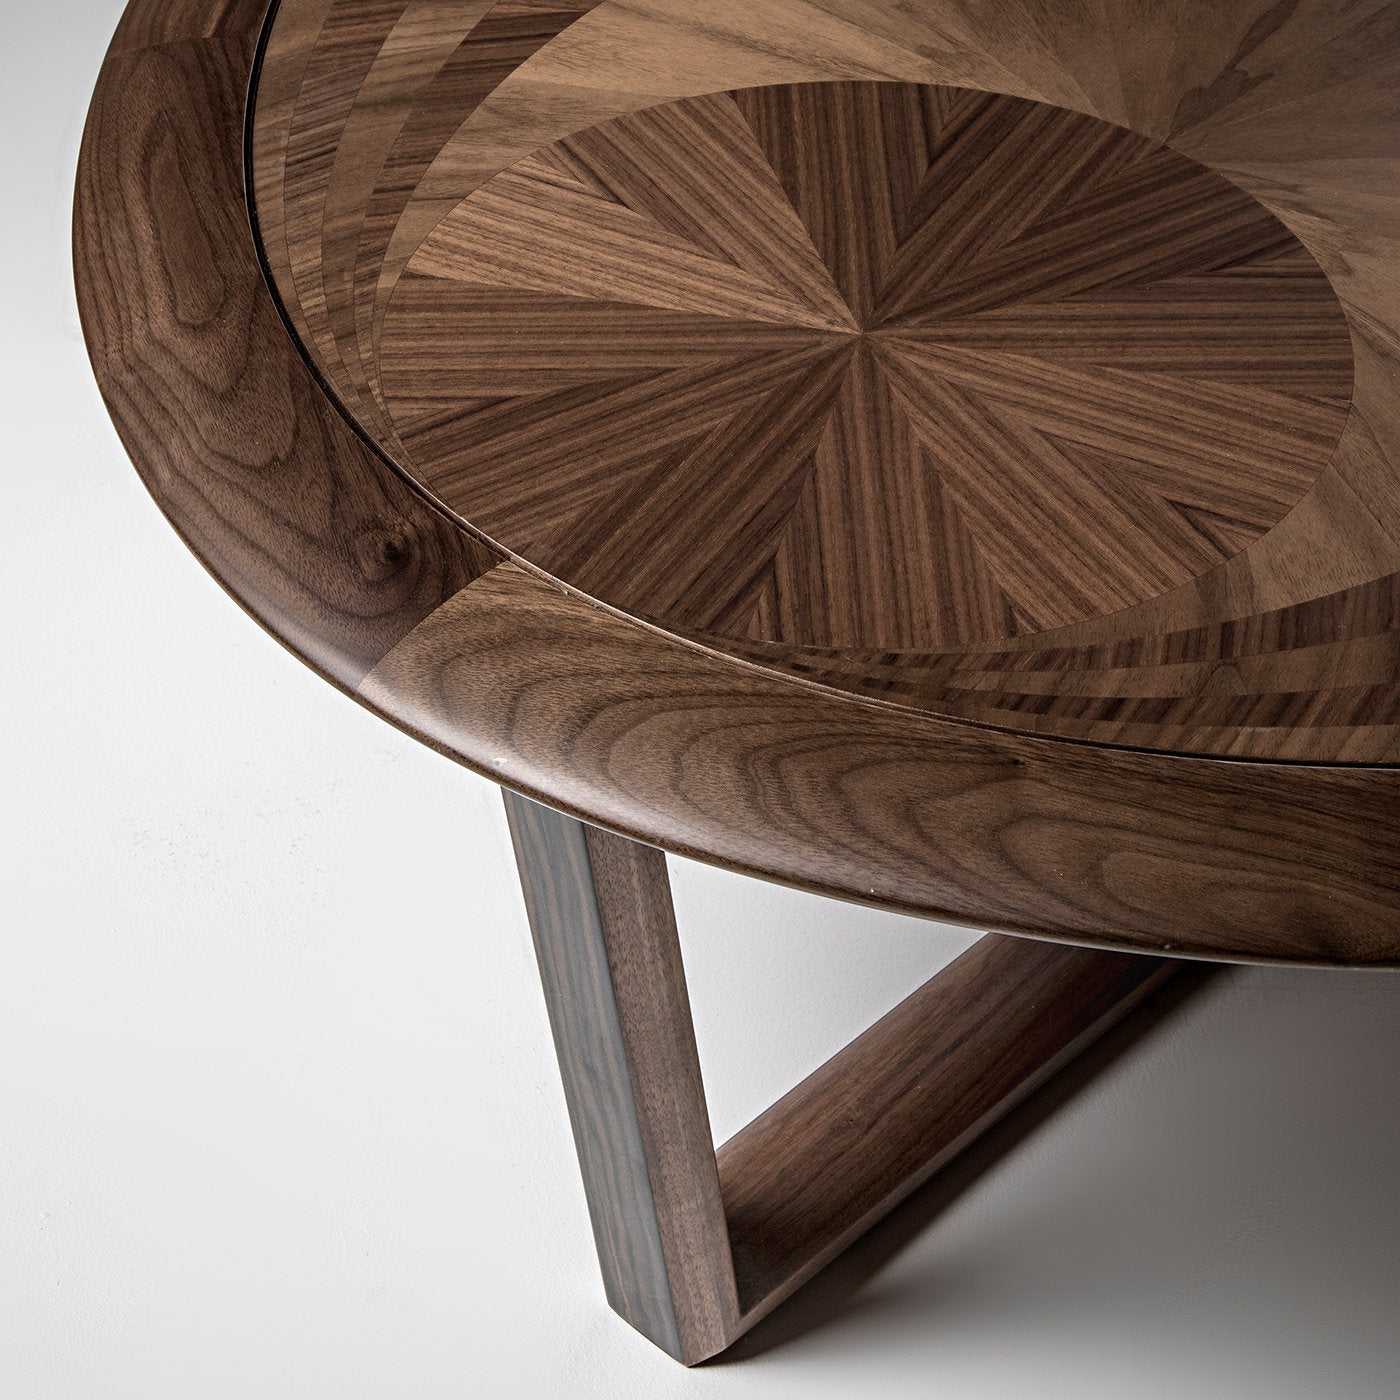 Piramide Coffee Table by Ivano Colombo - Alternative view 1